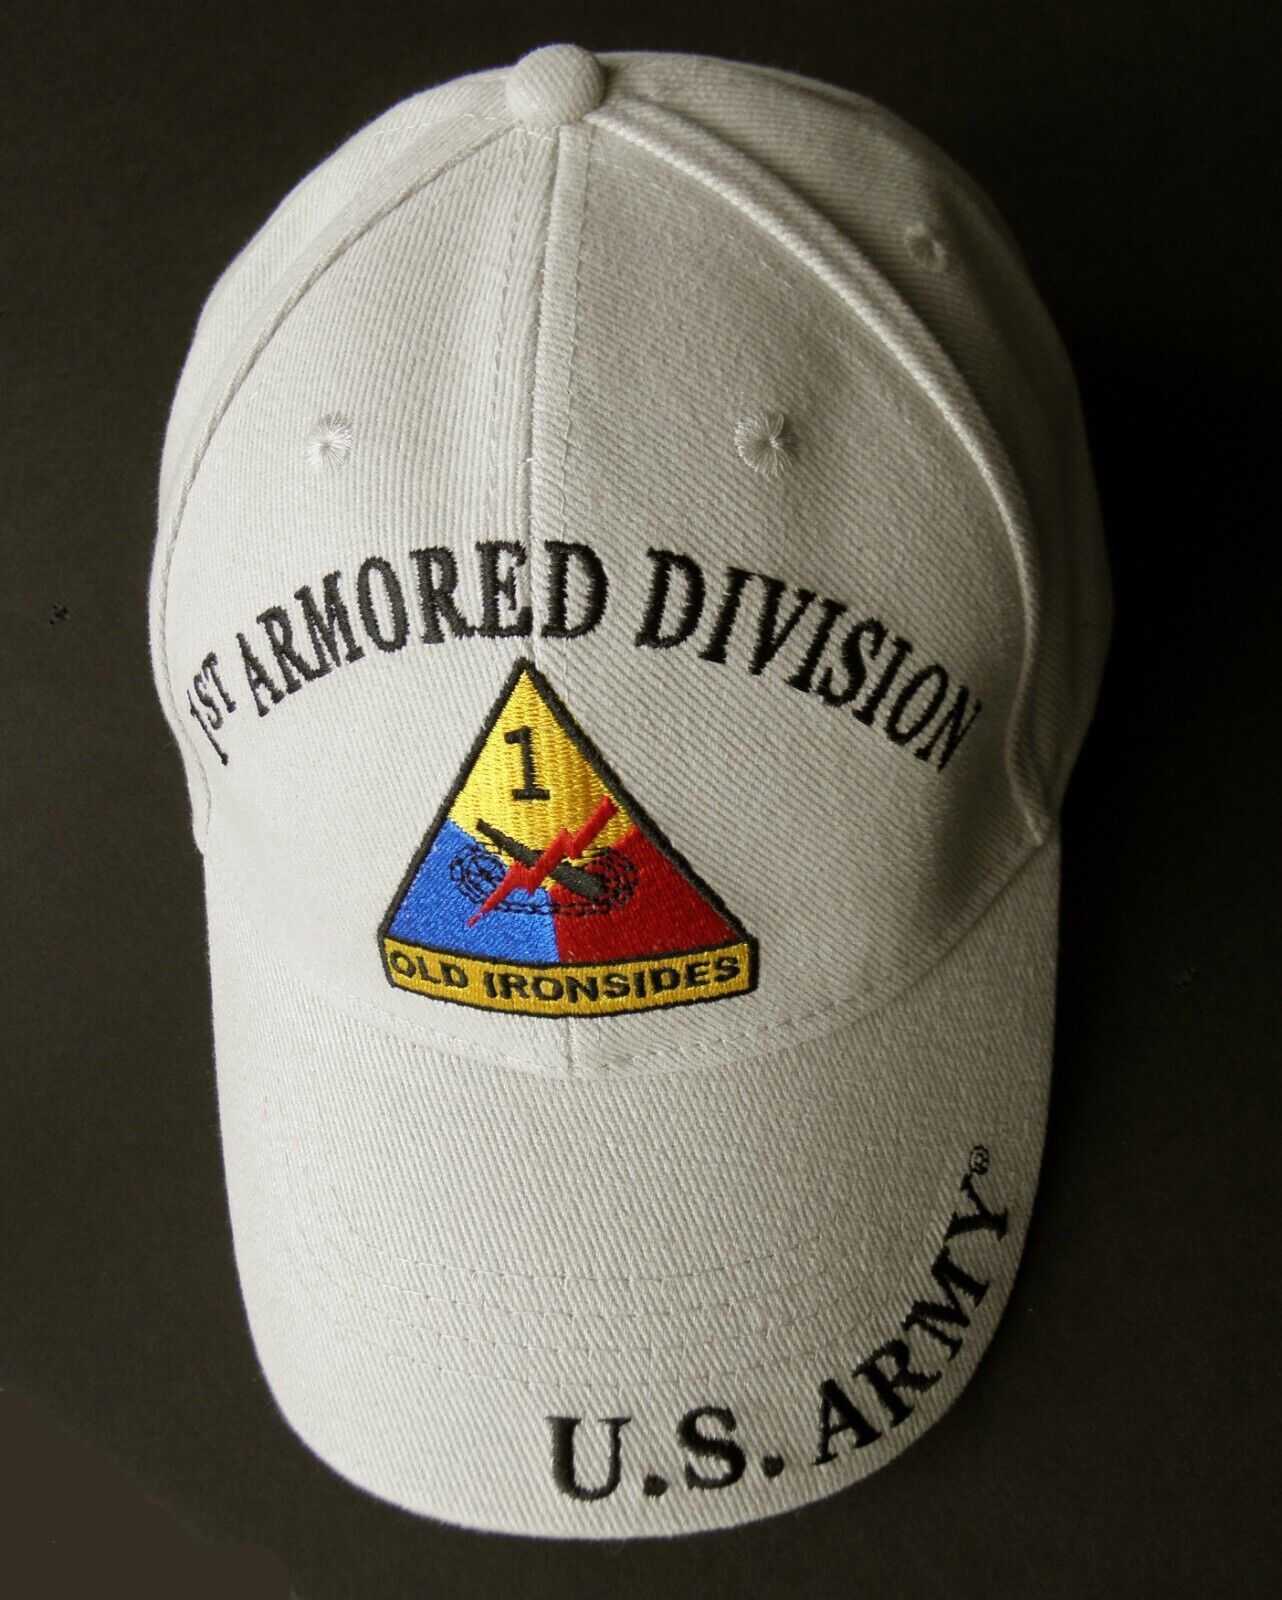 ARMY 1ST ARMORED DIVISION EMBROIDERED BASEBALL CAP OLD IRONSIDES - $12.44